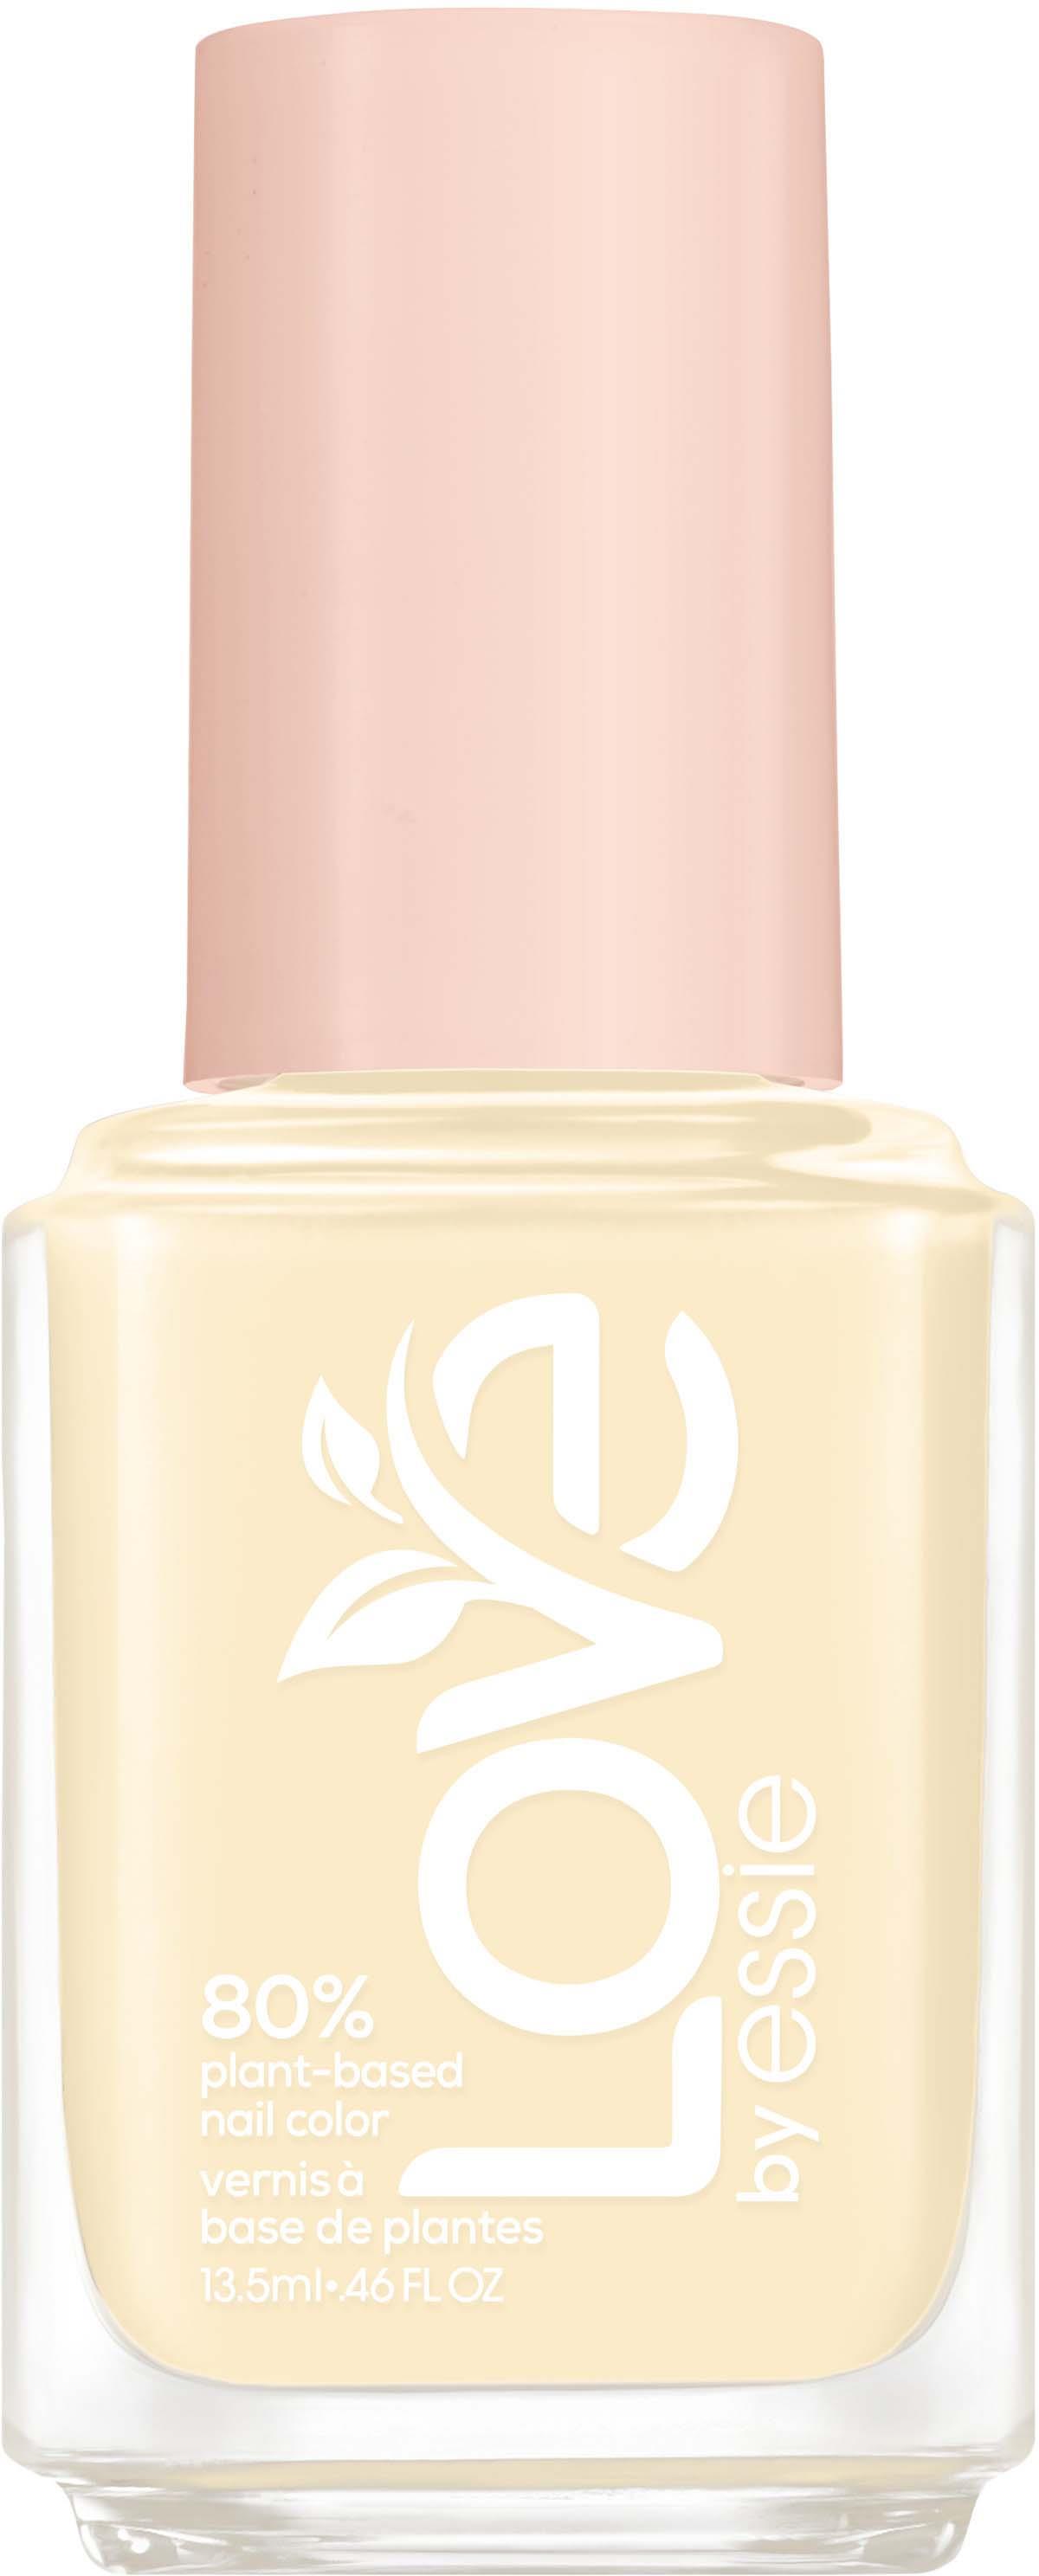 Plant-based Essie by Color The Brighter On 230 Side Essie Nail 80% LOVE